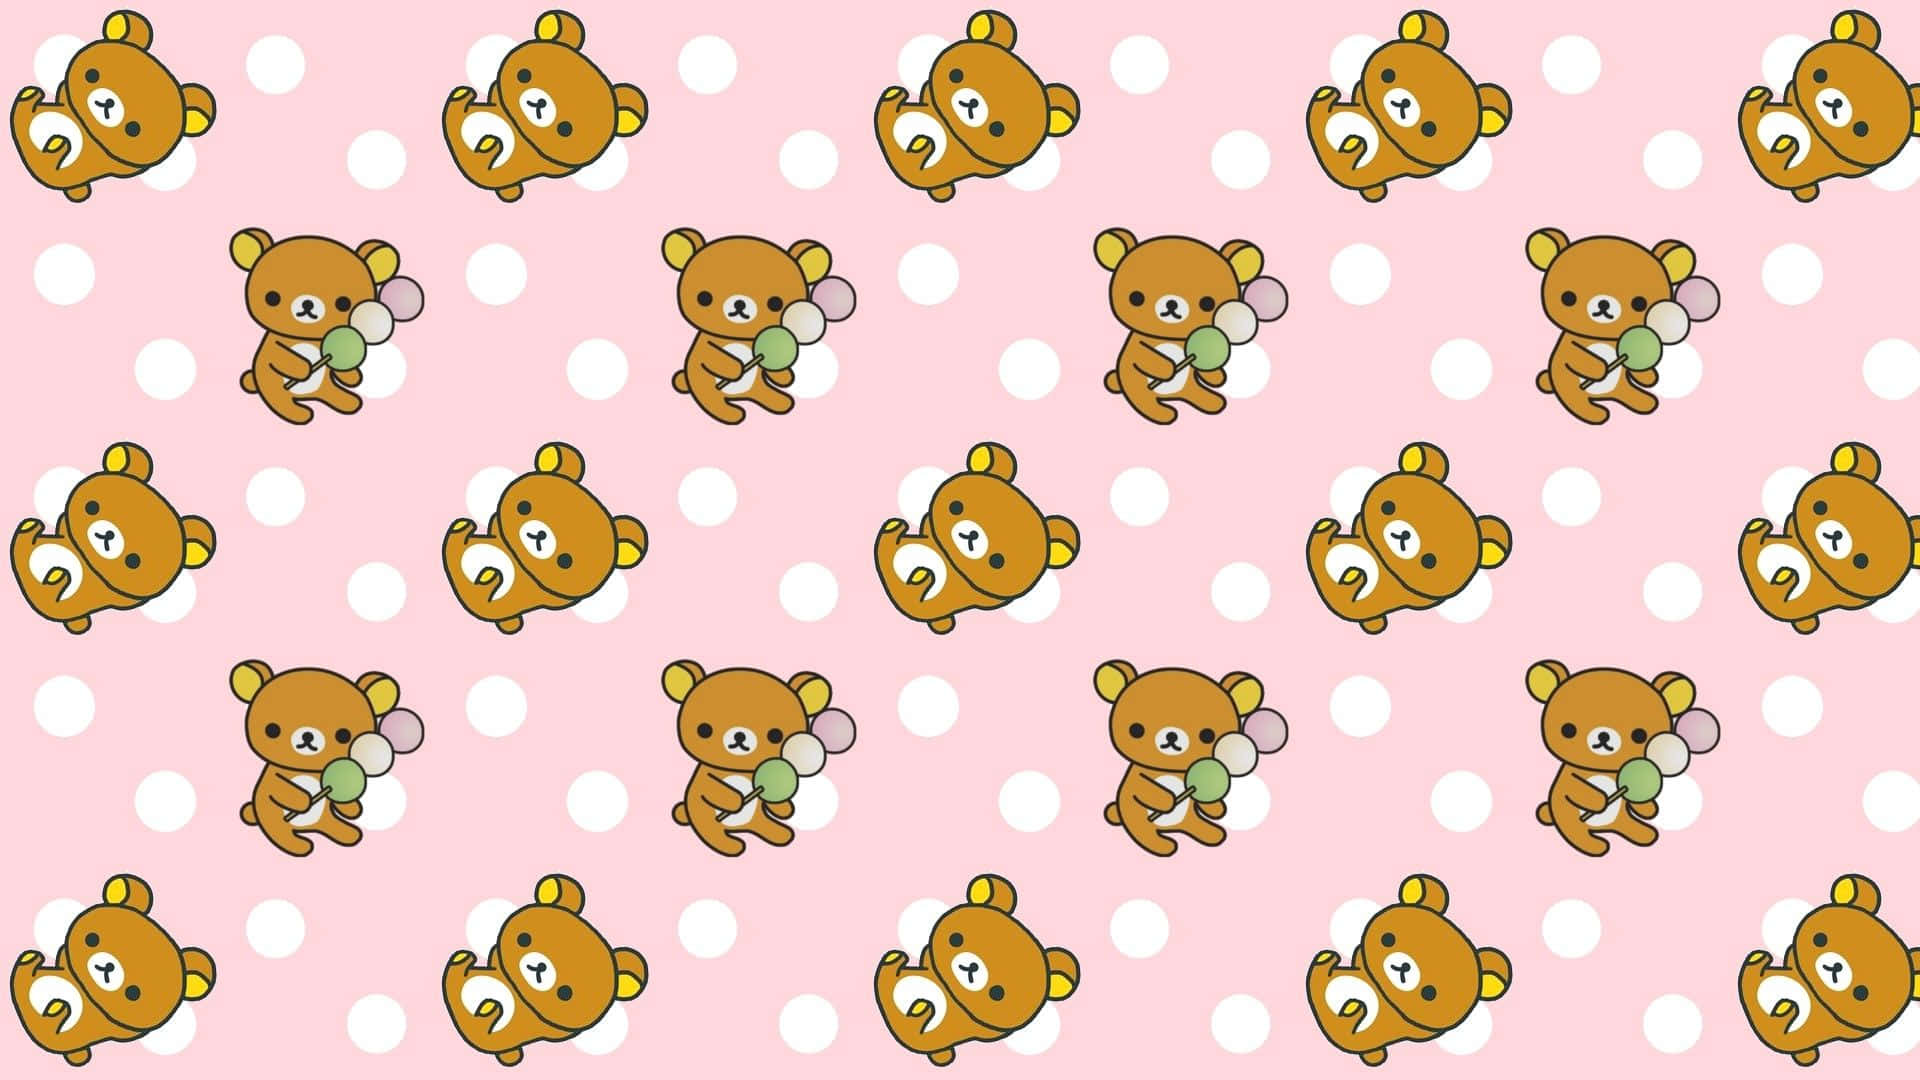 Let your inner cuteness shine through with this high-res pink background